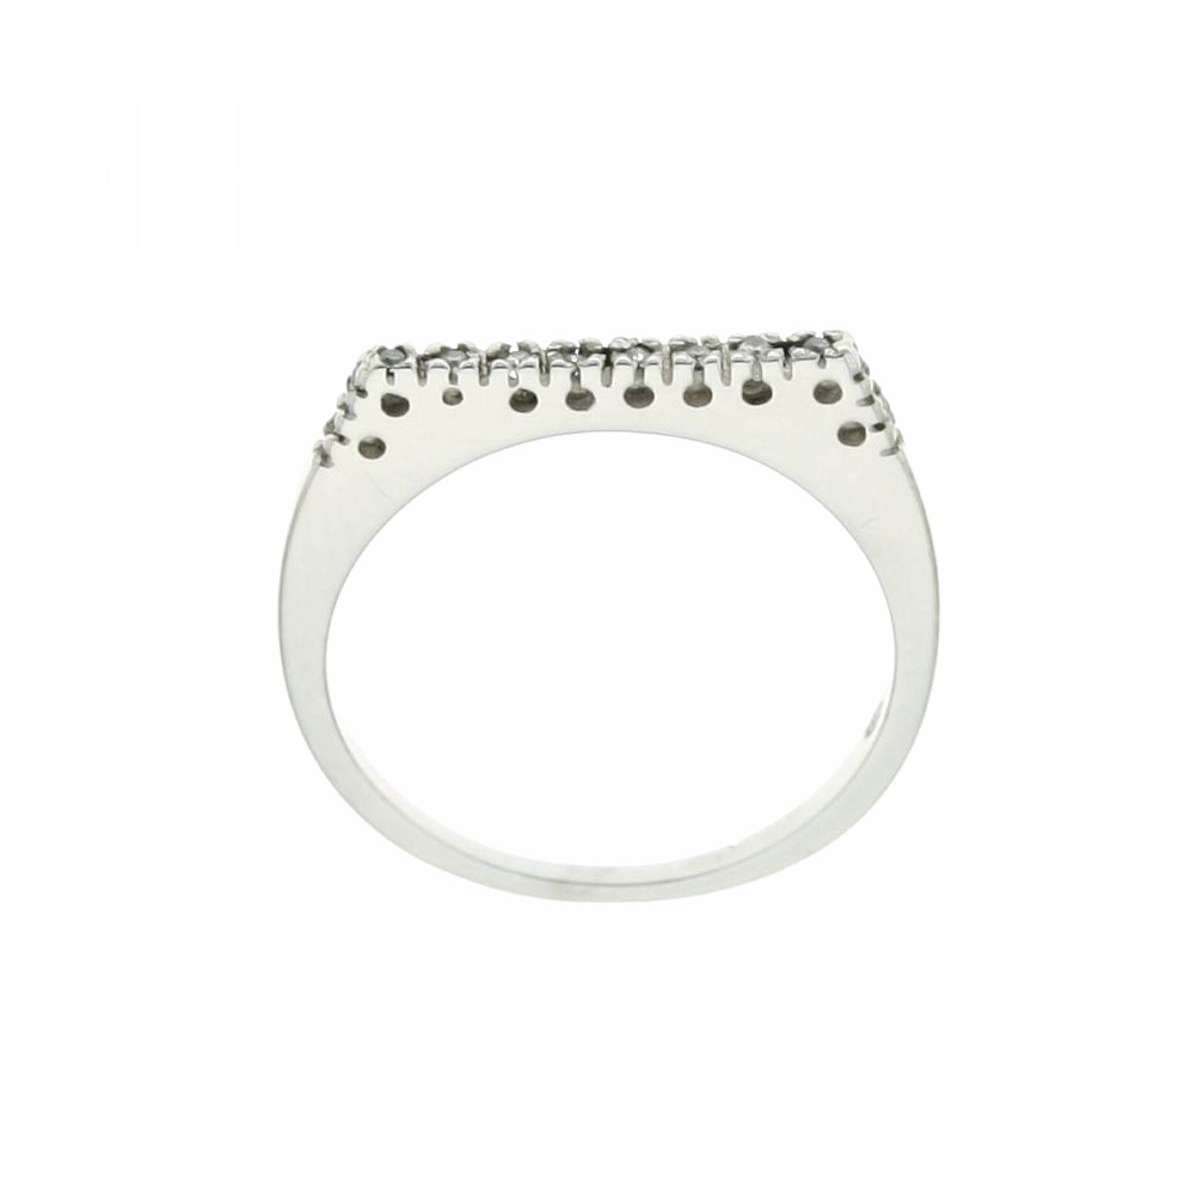 White gold eternity ring flat head 0.06 carats diamonds G Color VS1 Clarity